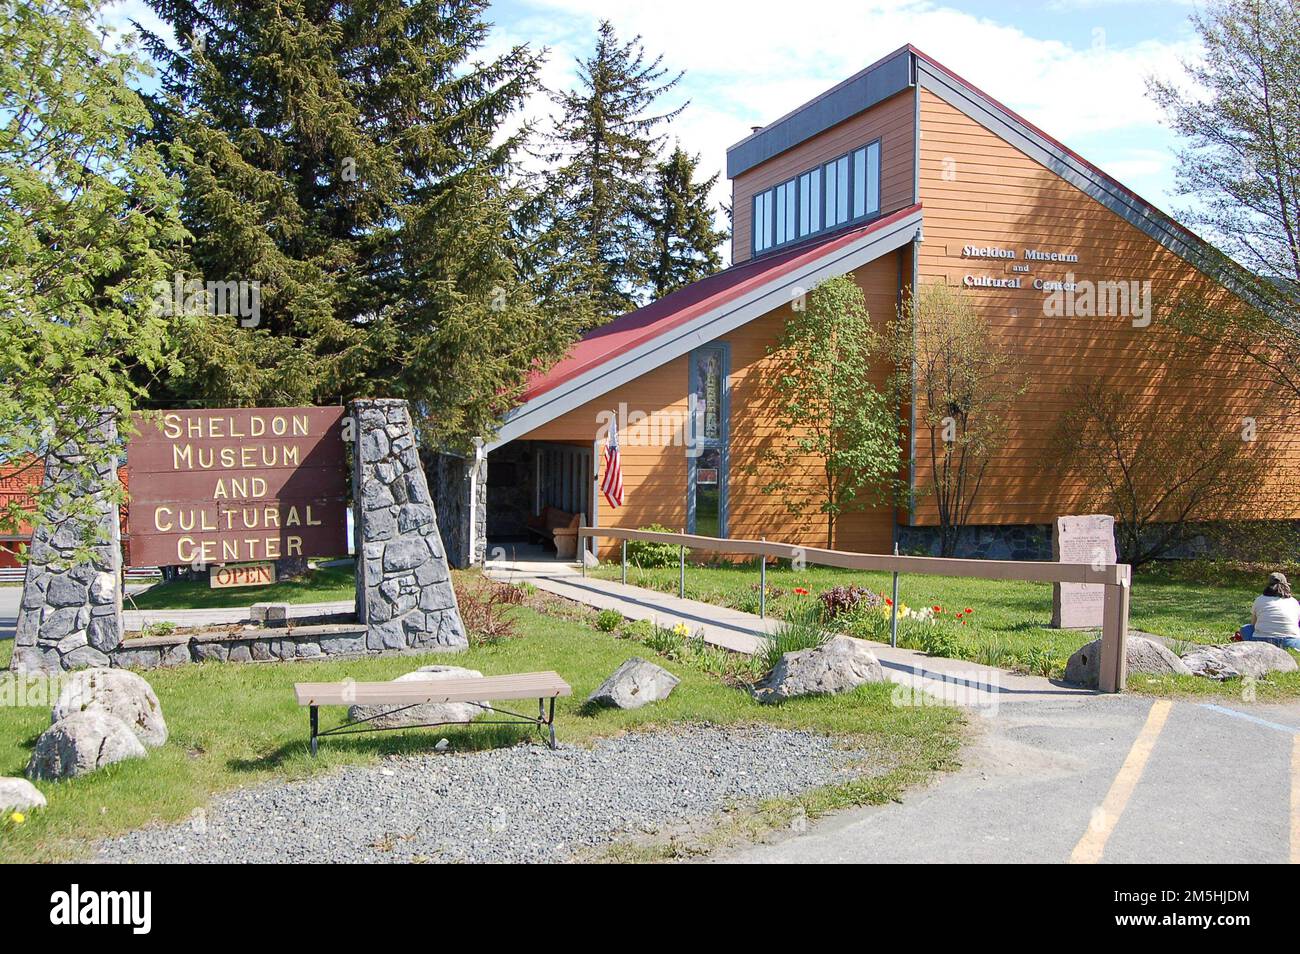 Haines Highway - Valley of the Eagles - Sheldon Museum. The Sheldon Museum and Cultural Center, on Main Street in Haines, is an orange-tan building with striking, triangular architecture. Haines, Alaska Stock Photo